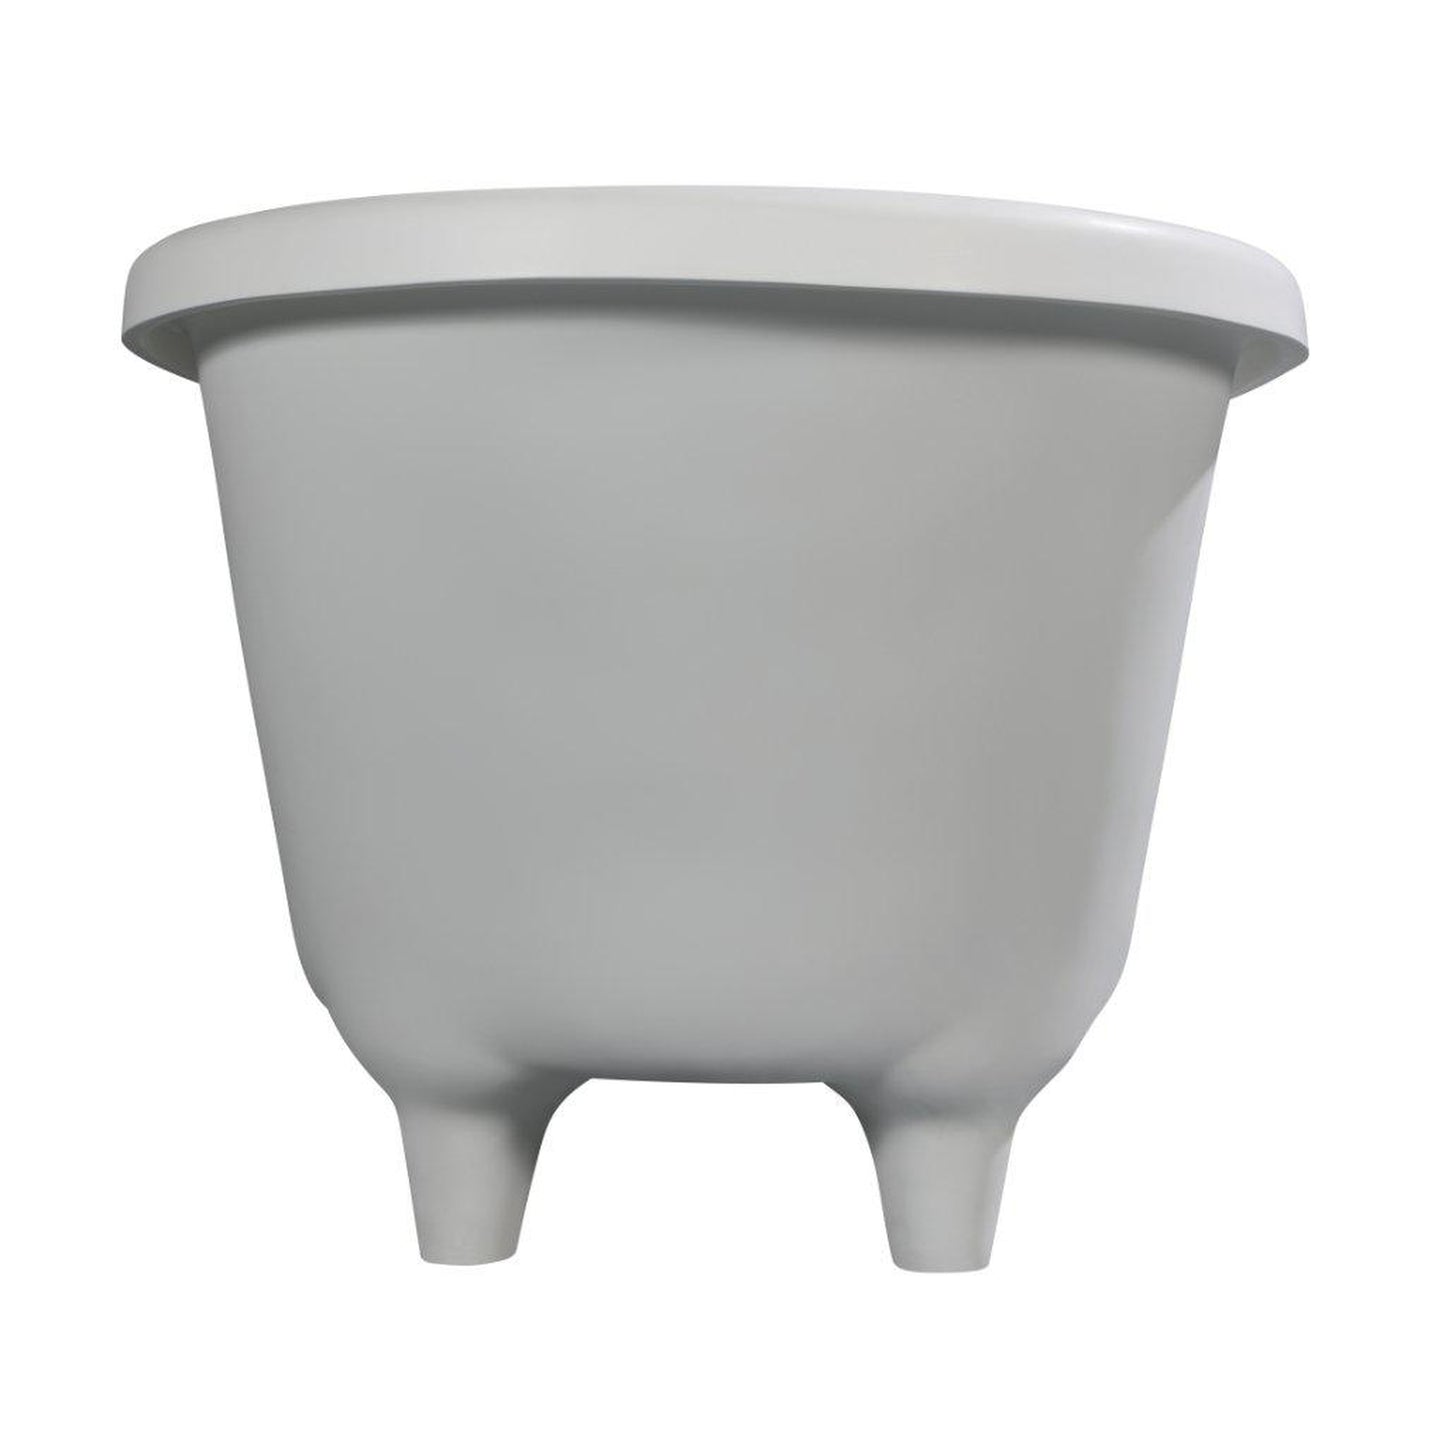 ALFI Brand AB9960 67" One Person Freestanding White Matte Clawfoot Solid Surface Resin Bathtub